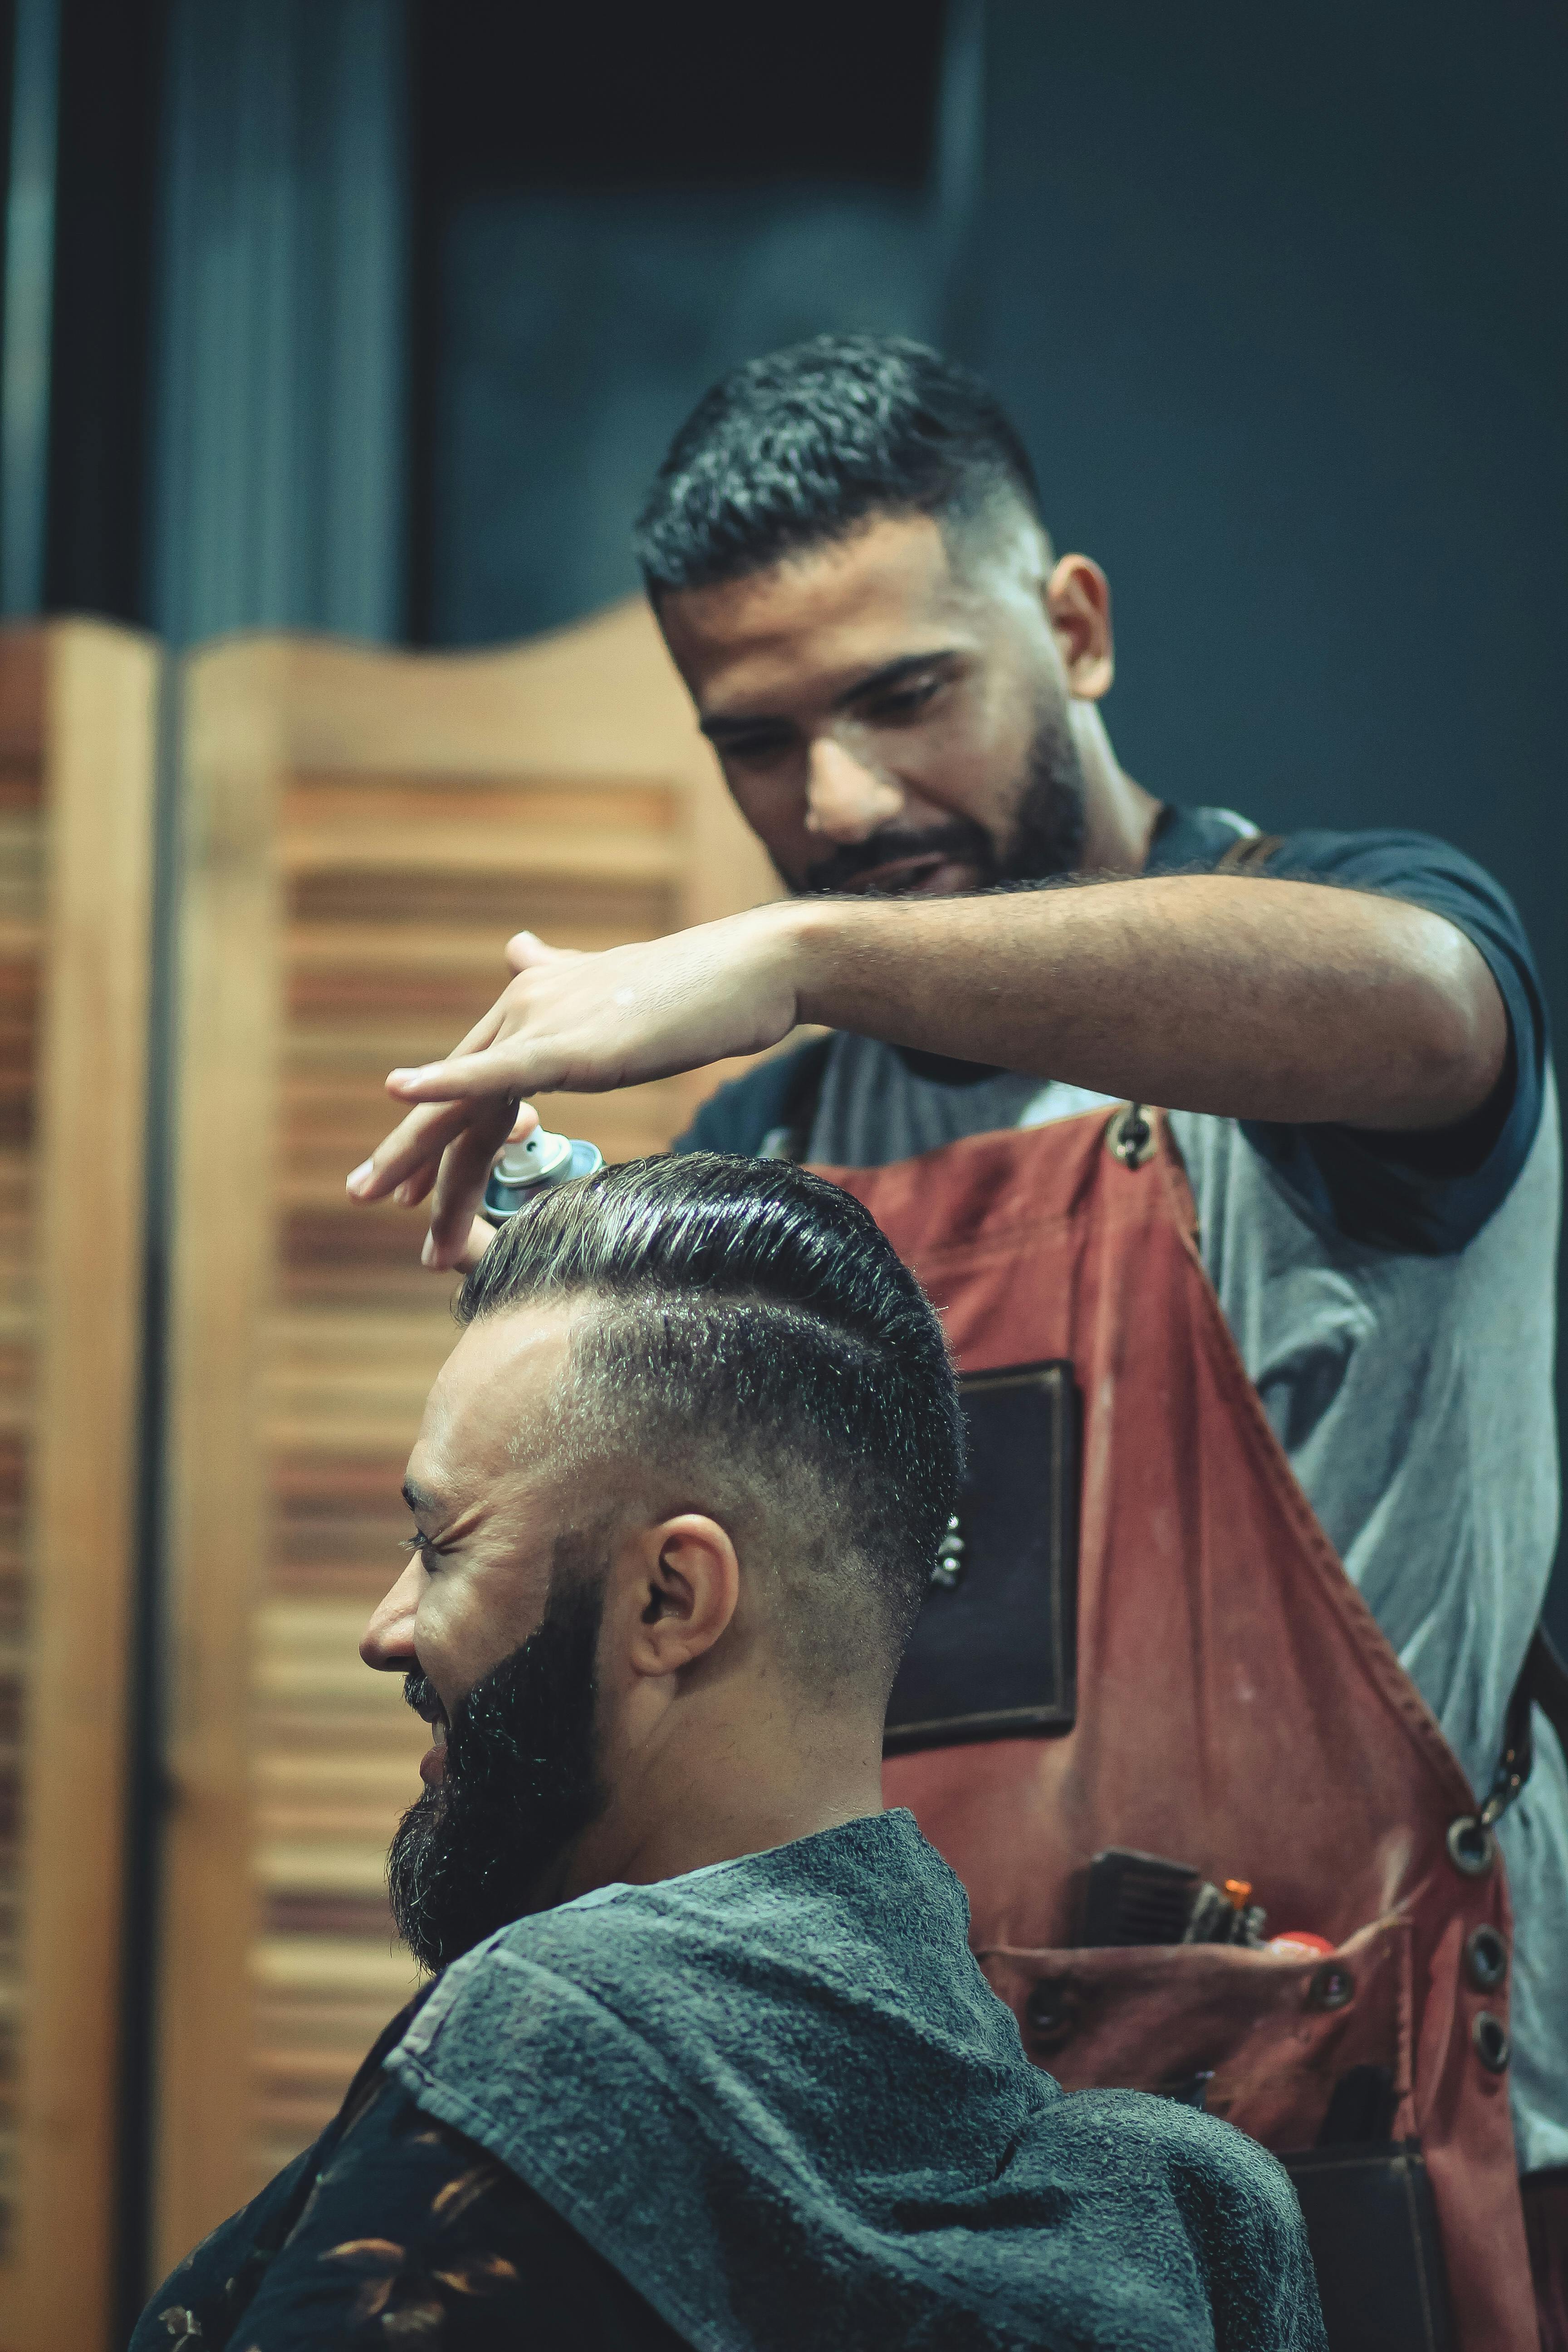 Barbershop pictures  Download free barber images for commercial